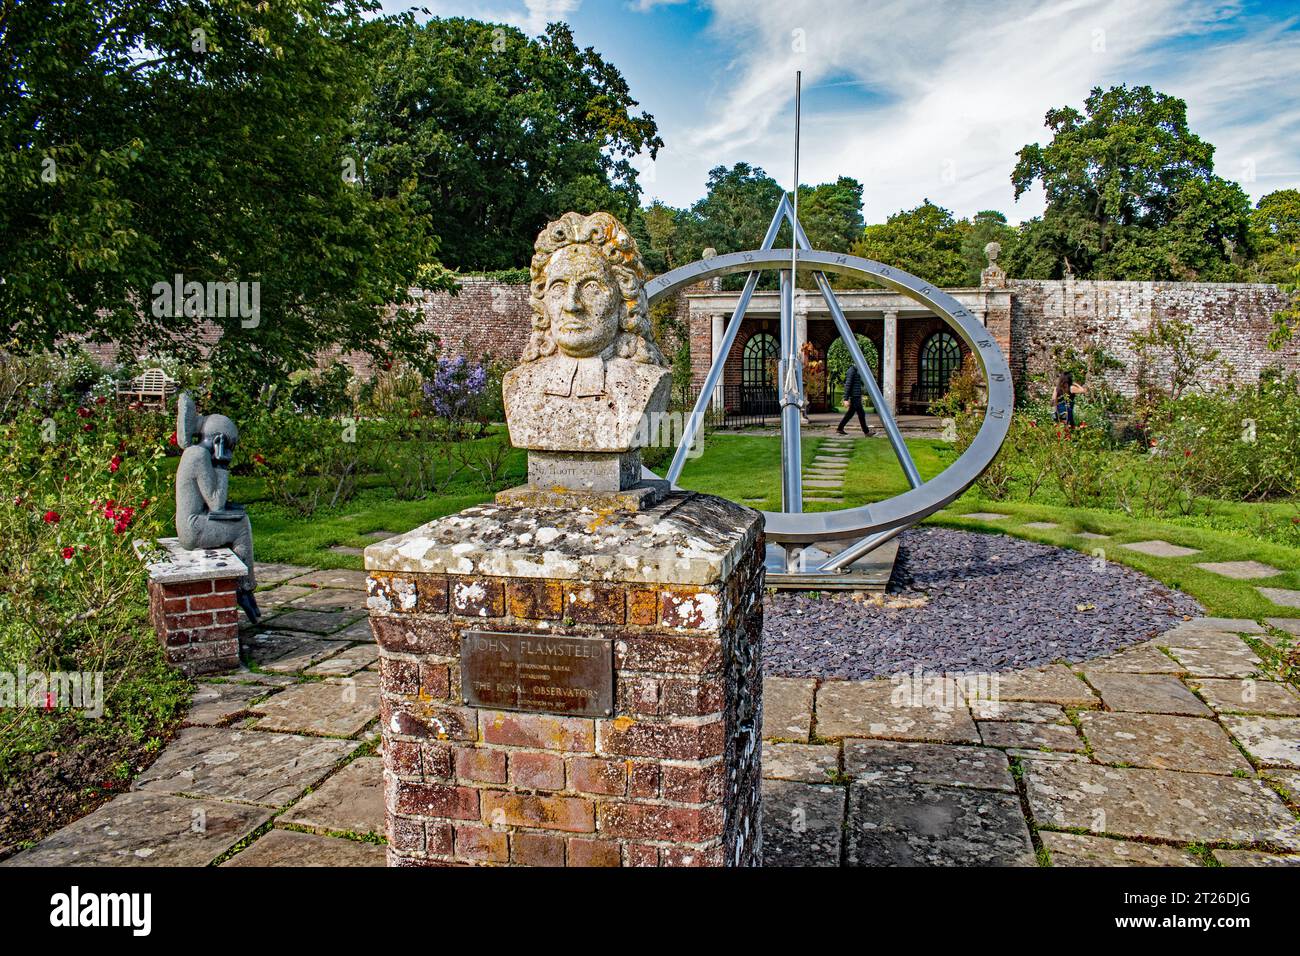 Reclining Equiangular Sundial and bust of John Flamsteed (Inventor), Herstmonceux Castle, East Sussex Stock Photo